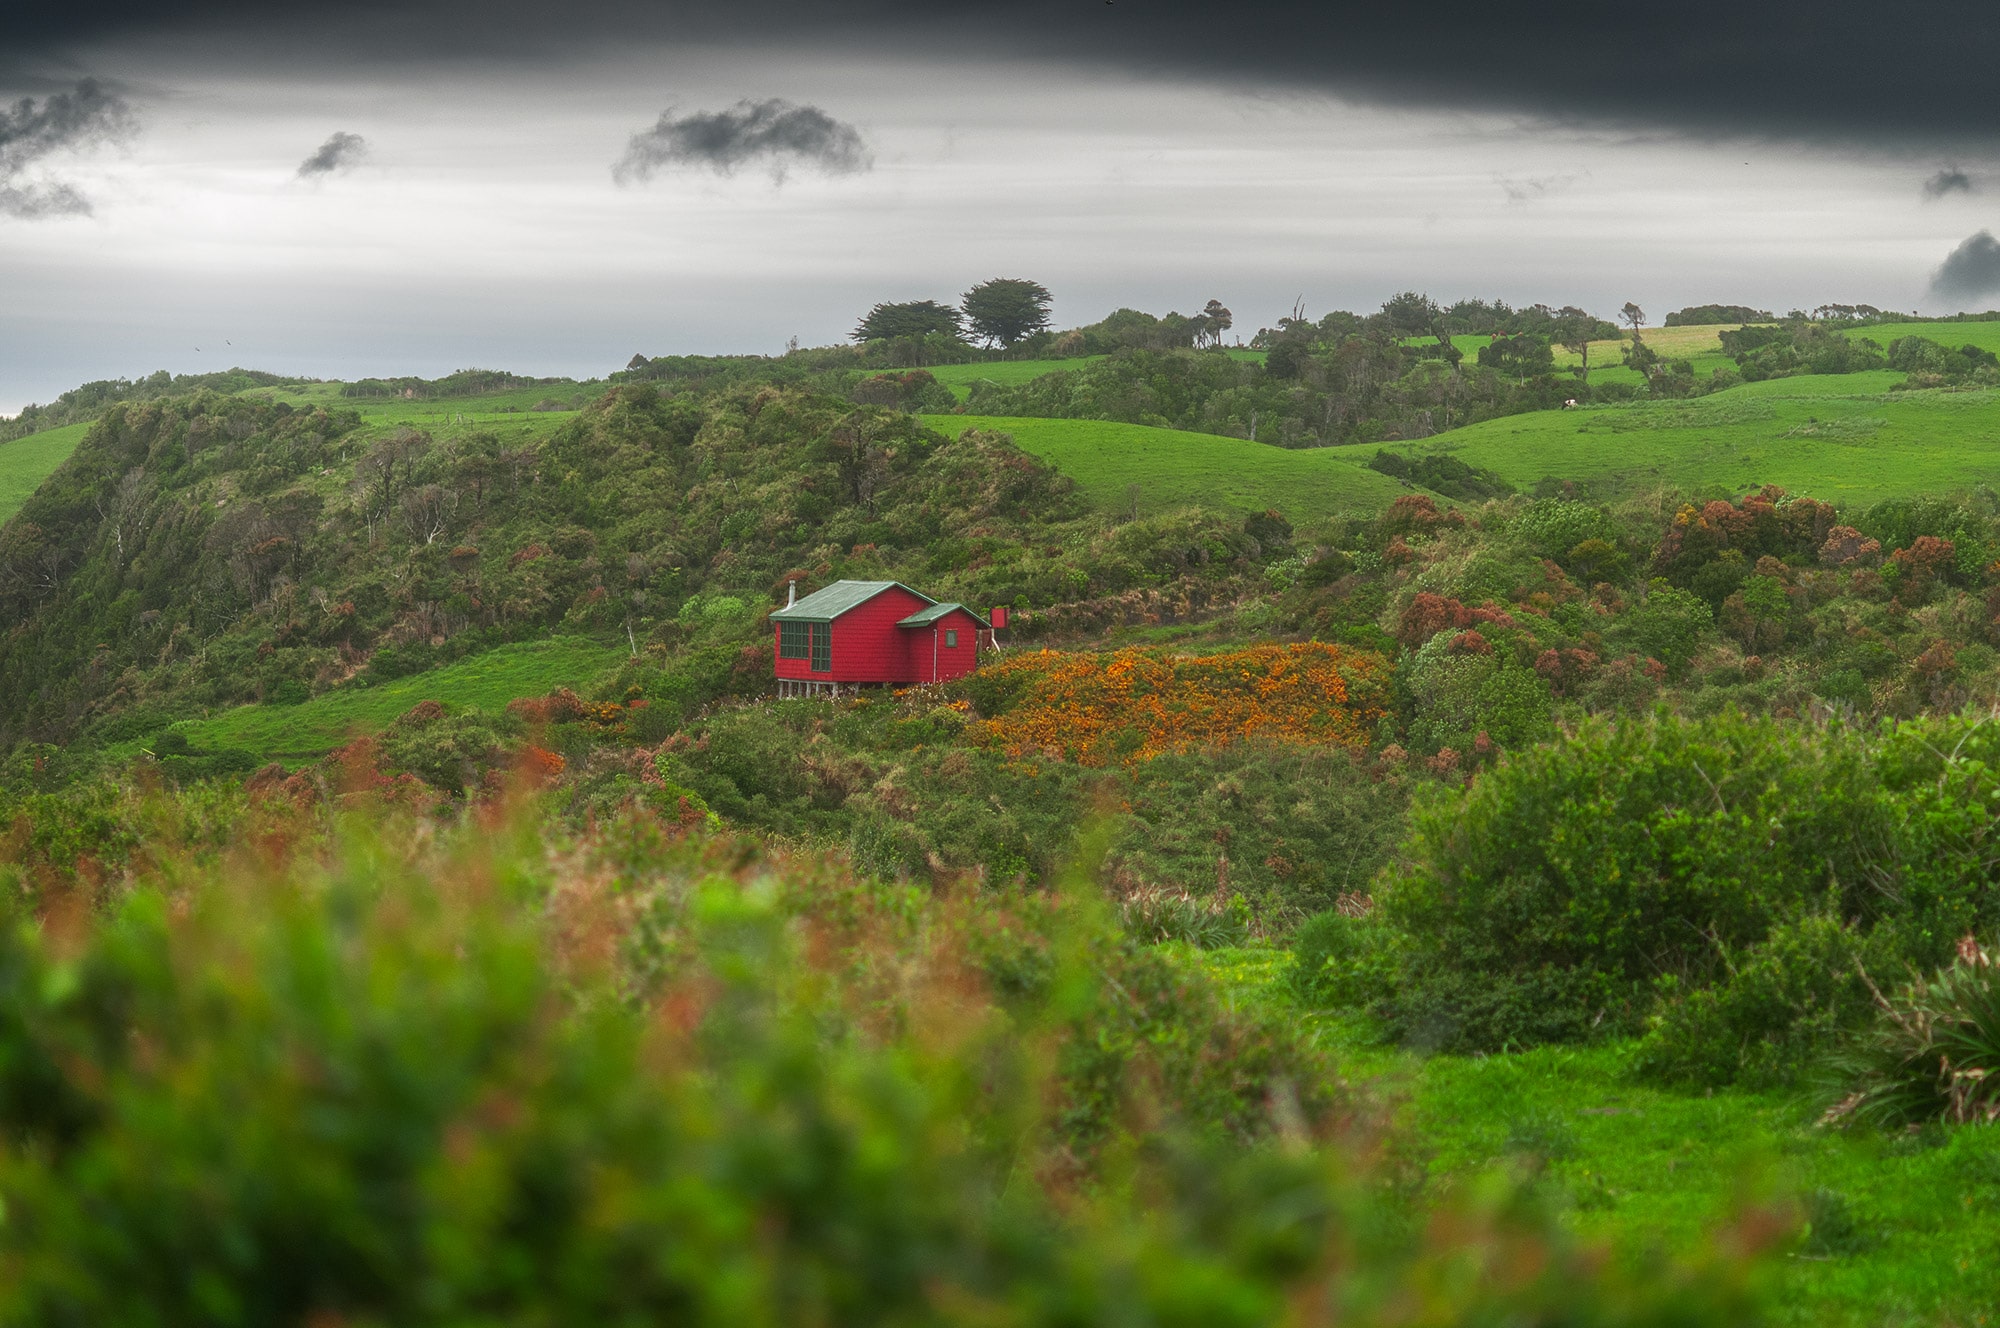 Explore the picturesque beauty of Chiloé Island with this captivating landscape photograph taken by Swiss artist Jennifer Esseiva using her Nikon D300. A small red house stands in solitary splendor amidst the vibrant fields of Ancud, creating a striking focal point against the backdrop of this lush and green island. The dramatic sky adds a touch of cinematic allure to the scene, enhancing the overall visual impact of this seascape masterpiece. Immerse yourself in the tranquility of this idyllic setting, expertly captured by Esseiva's lens, as she skillfully blends natural beauty with artistic finesse. Discover the charm of Chiloé, where the harmonious convergence of a small red house, fields, and dramatic skies paints a mesmerizing portrait of serenity and solitude.